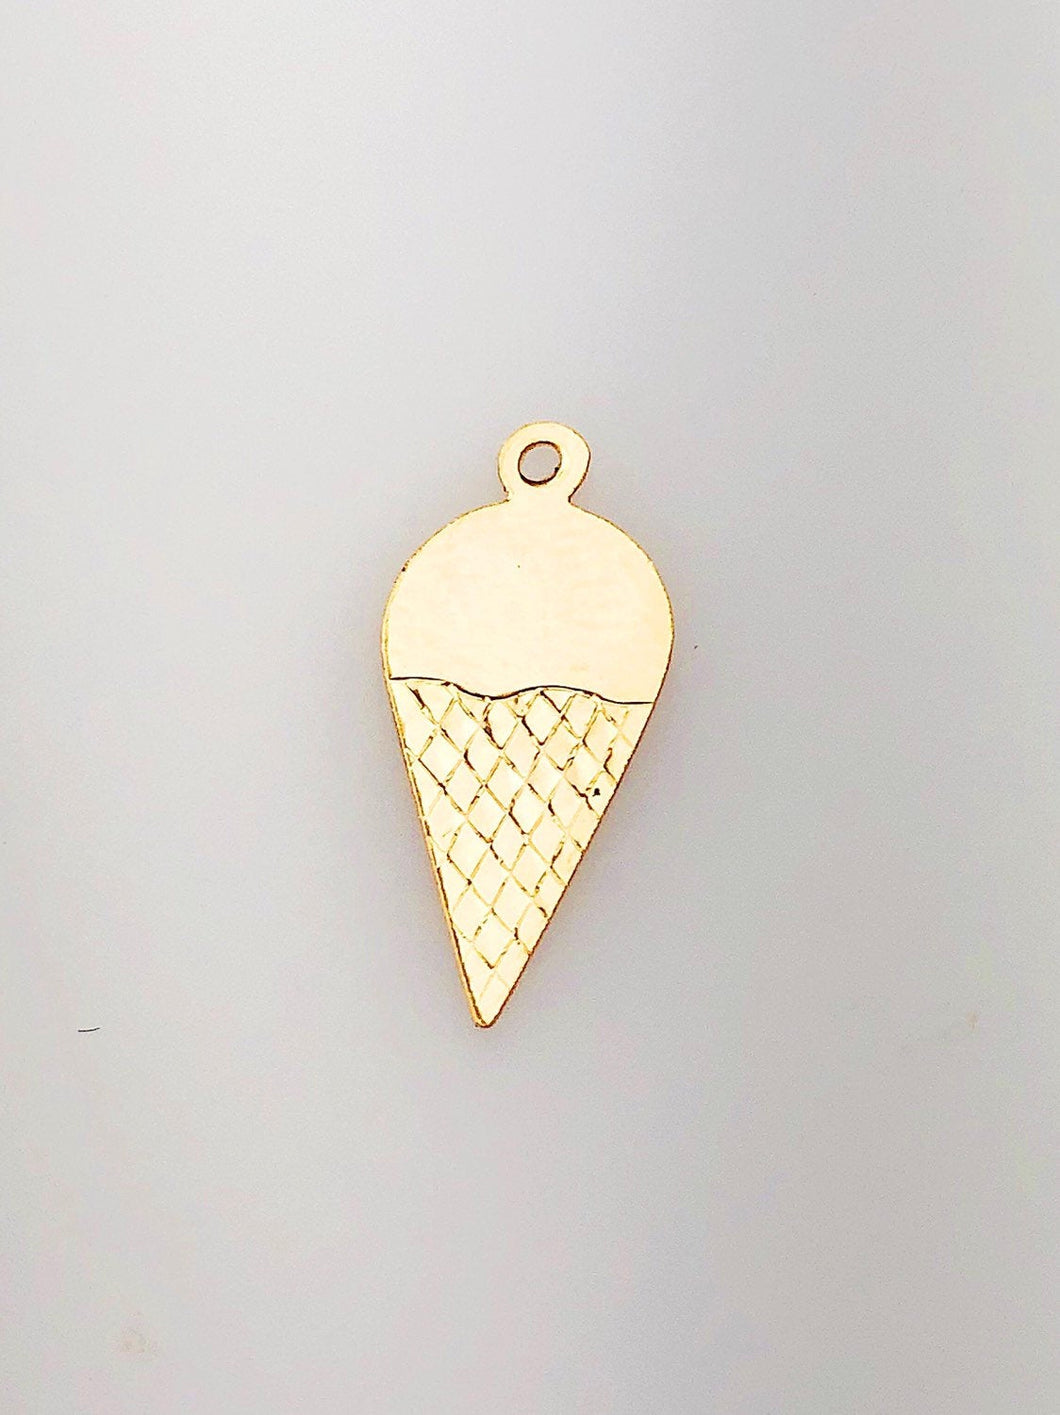 14K Gold Fill Ice Cream Cone Charm w/ Ring, 8.0mm, Made in USA - 421